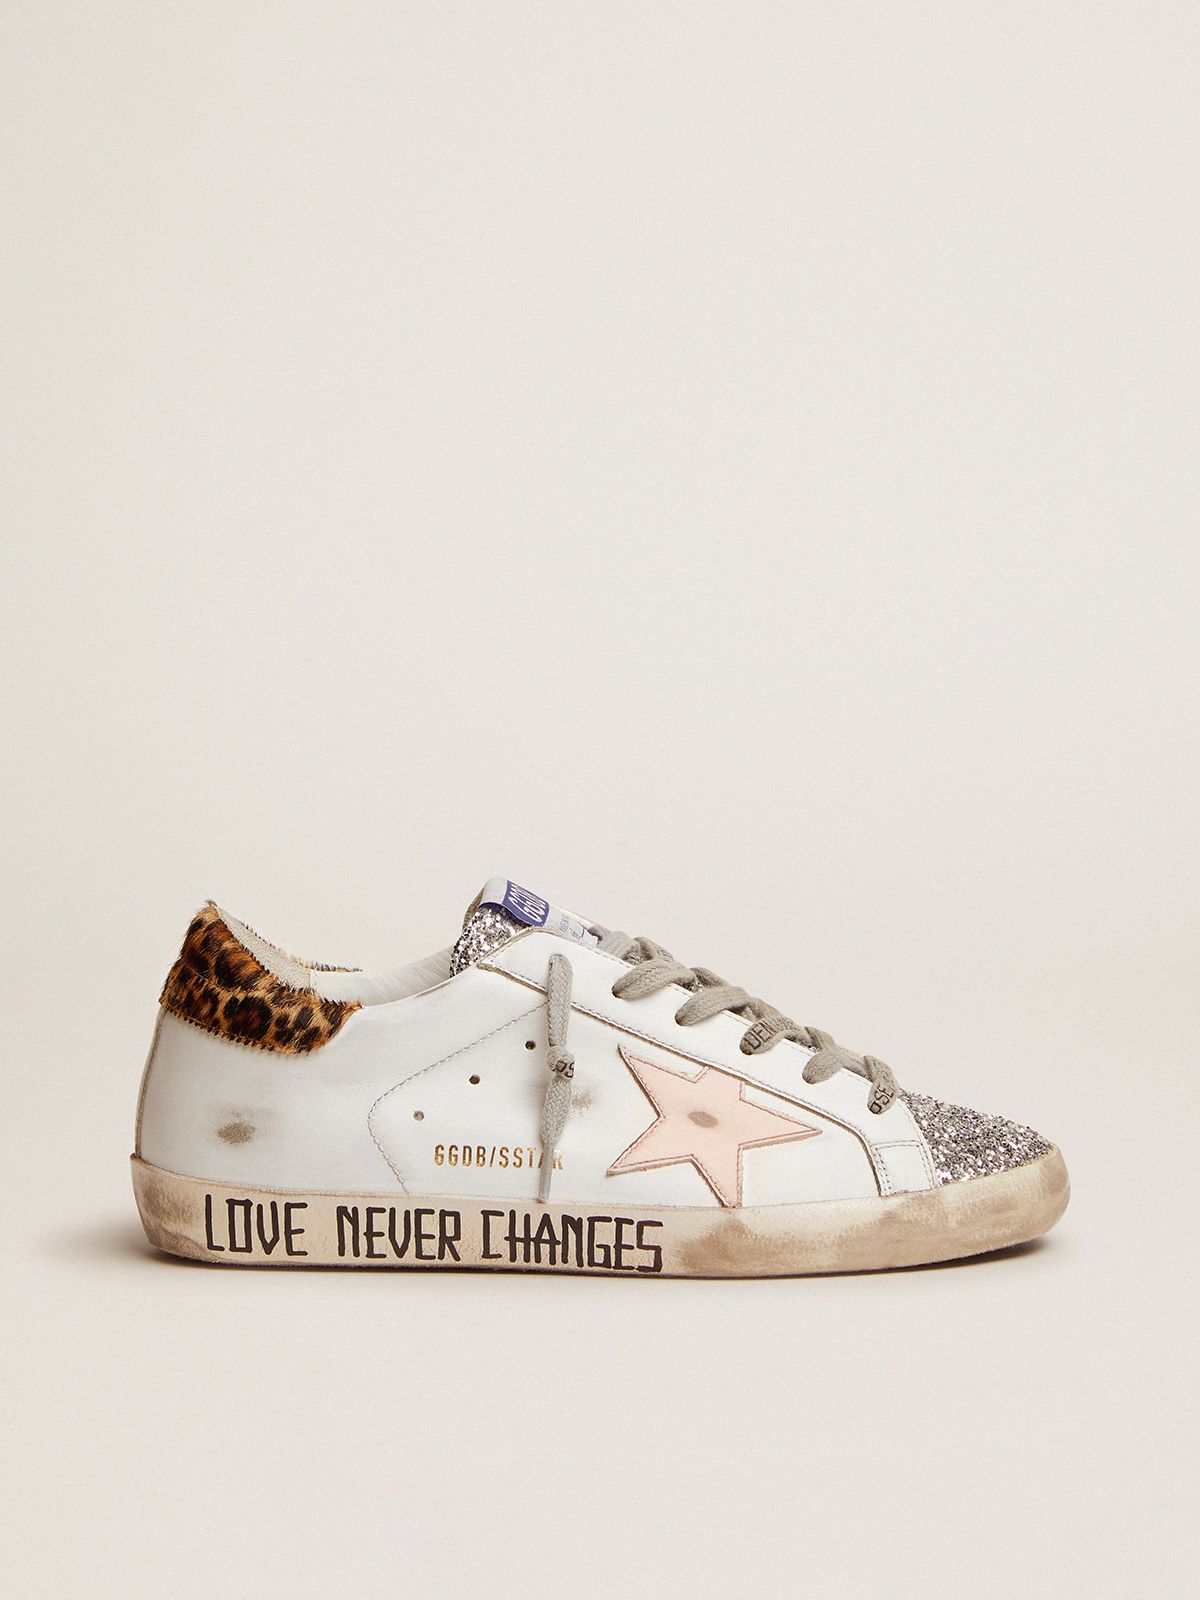 Sneakers Uomo Golden Goose Super-Star sneakers with silver glitter tongue and handwritten lettering on the foxing